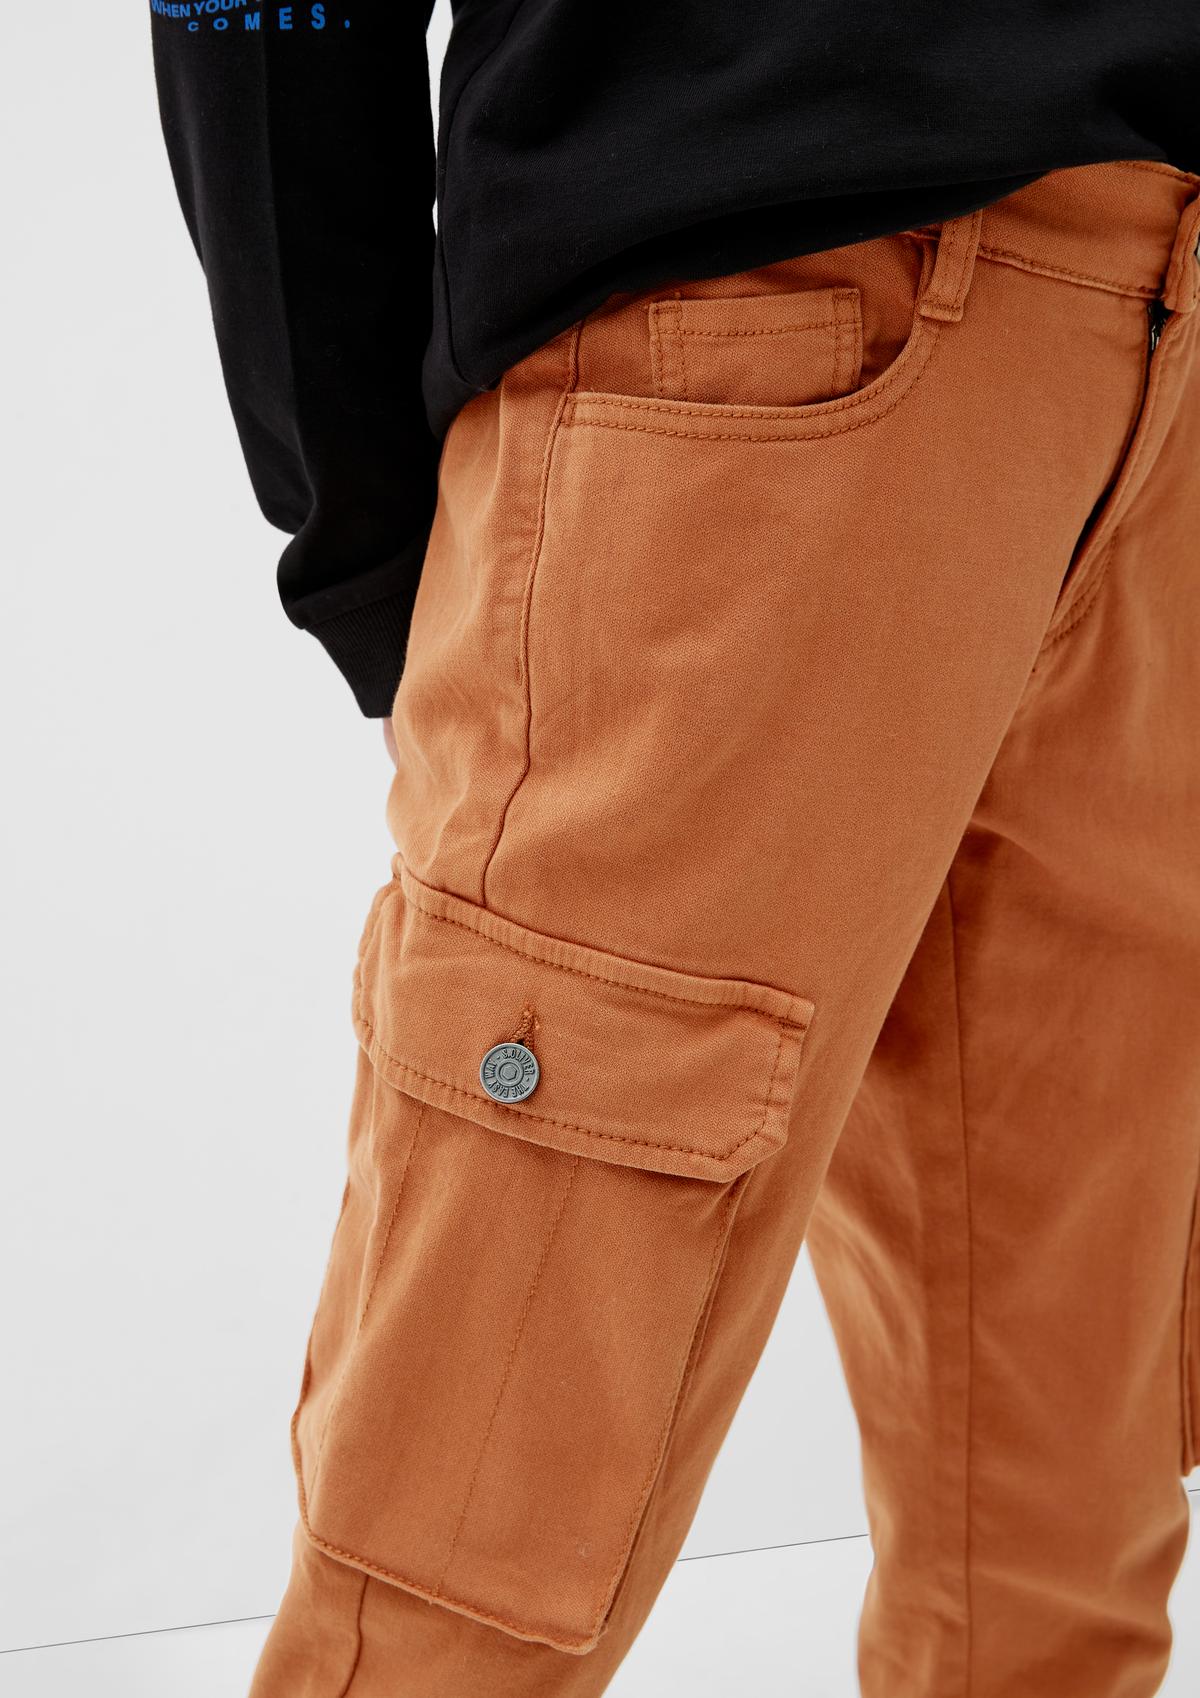 with - pockets cargo cinnamon trousers fit: Slim